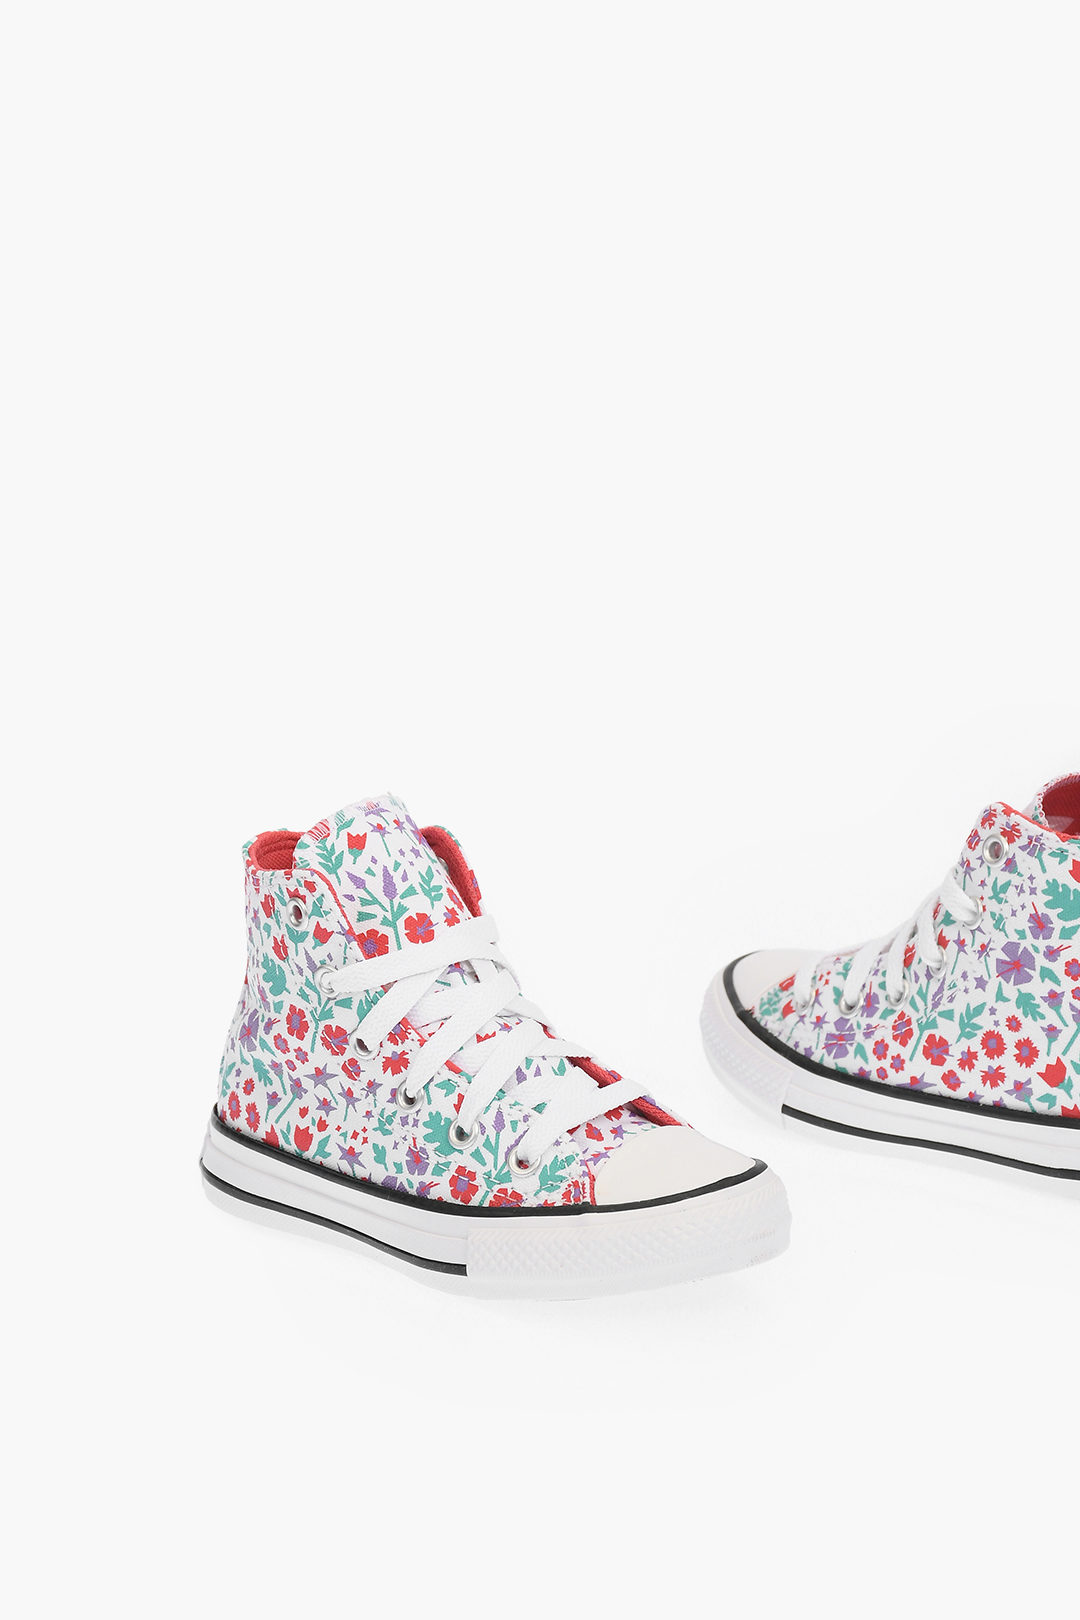 Converse KIDS ALL STAR CHUCK TAYLOR Floral Patterned high-top Sneakers  girls - Glamood Outlet